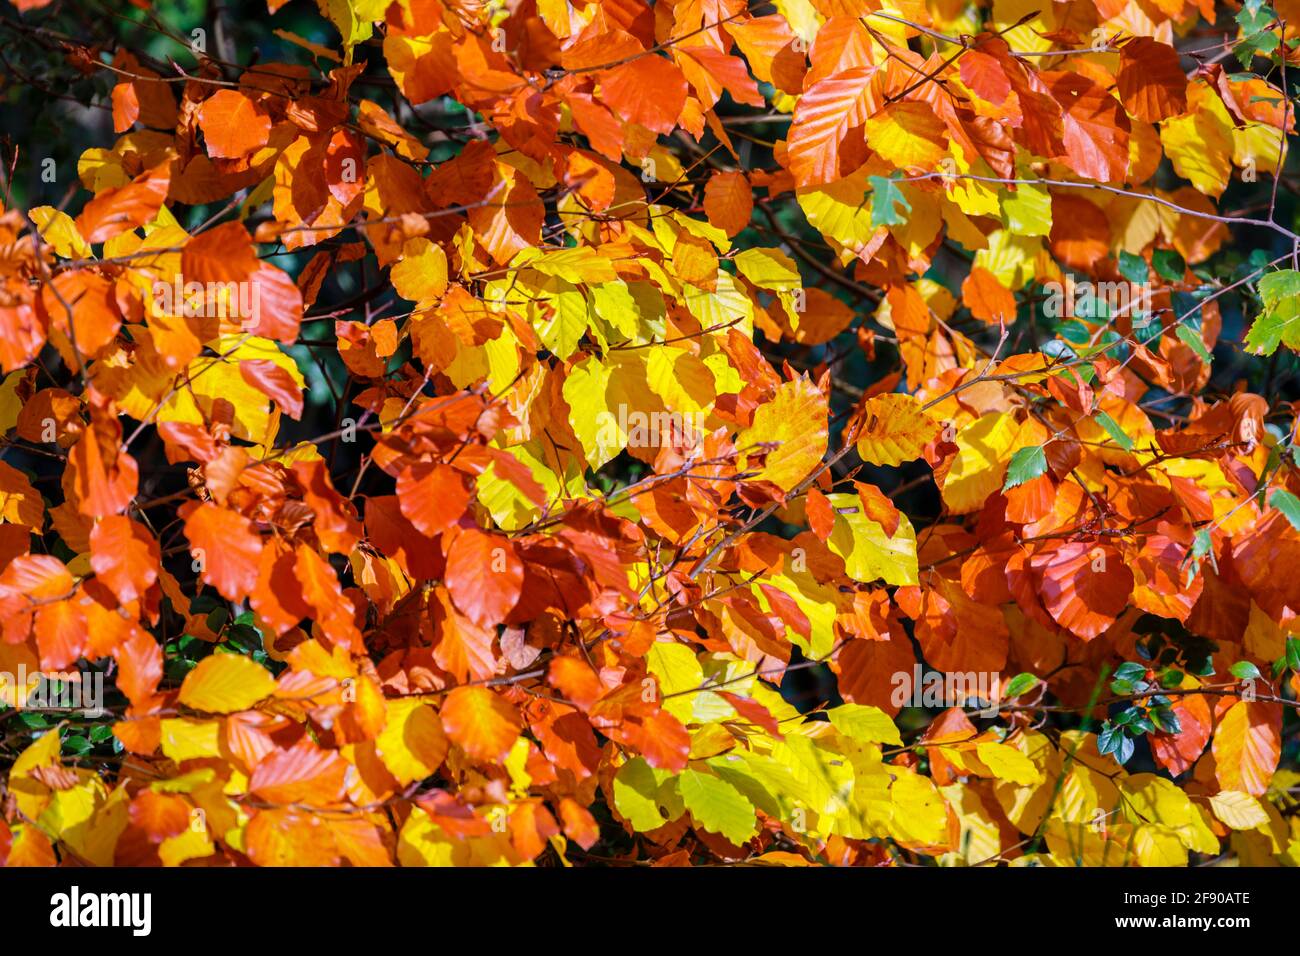 Close-up view of leaves of a European beech tree, Fagus sylvatica, turning golden yellow to brown colours glowing in late autumn sunlight Stock Photo